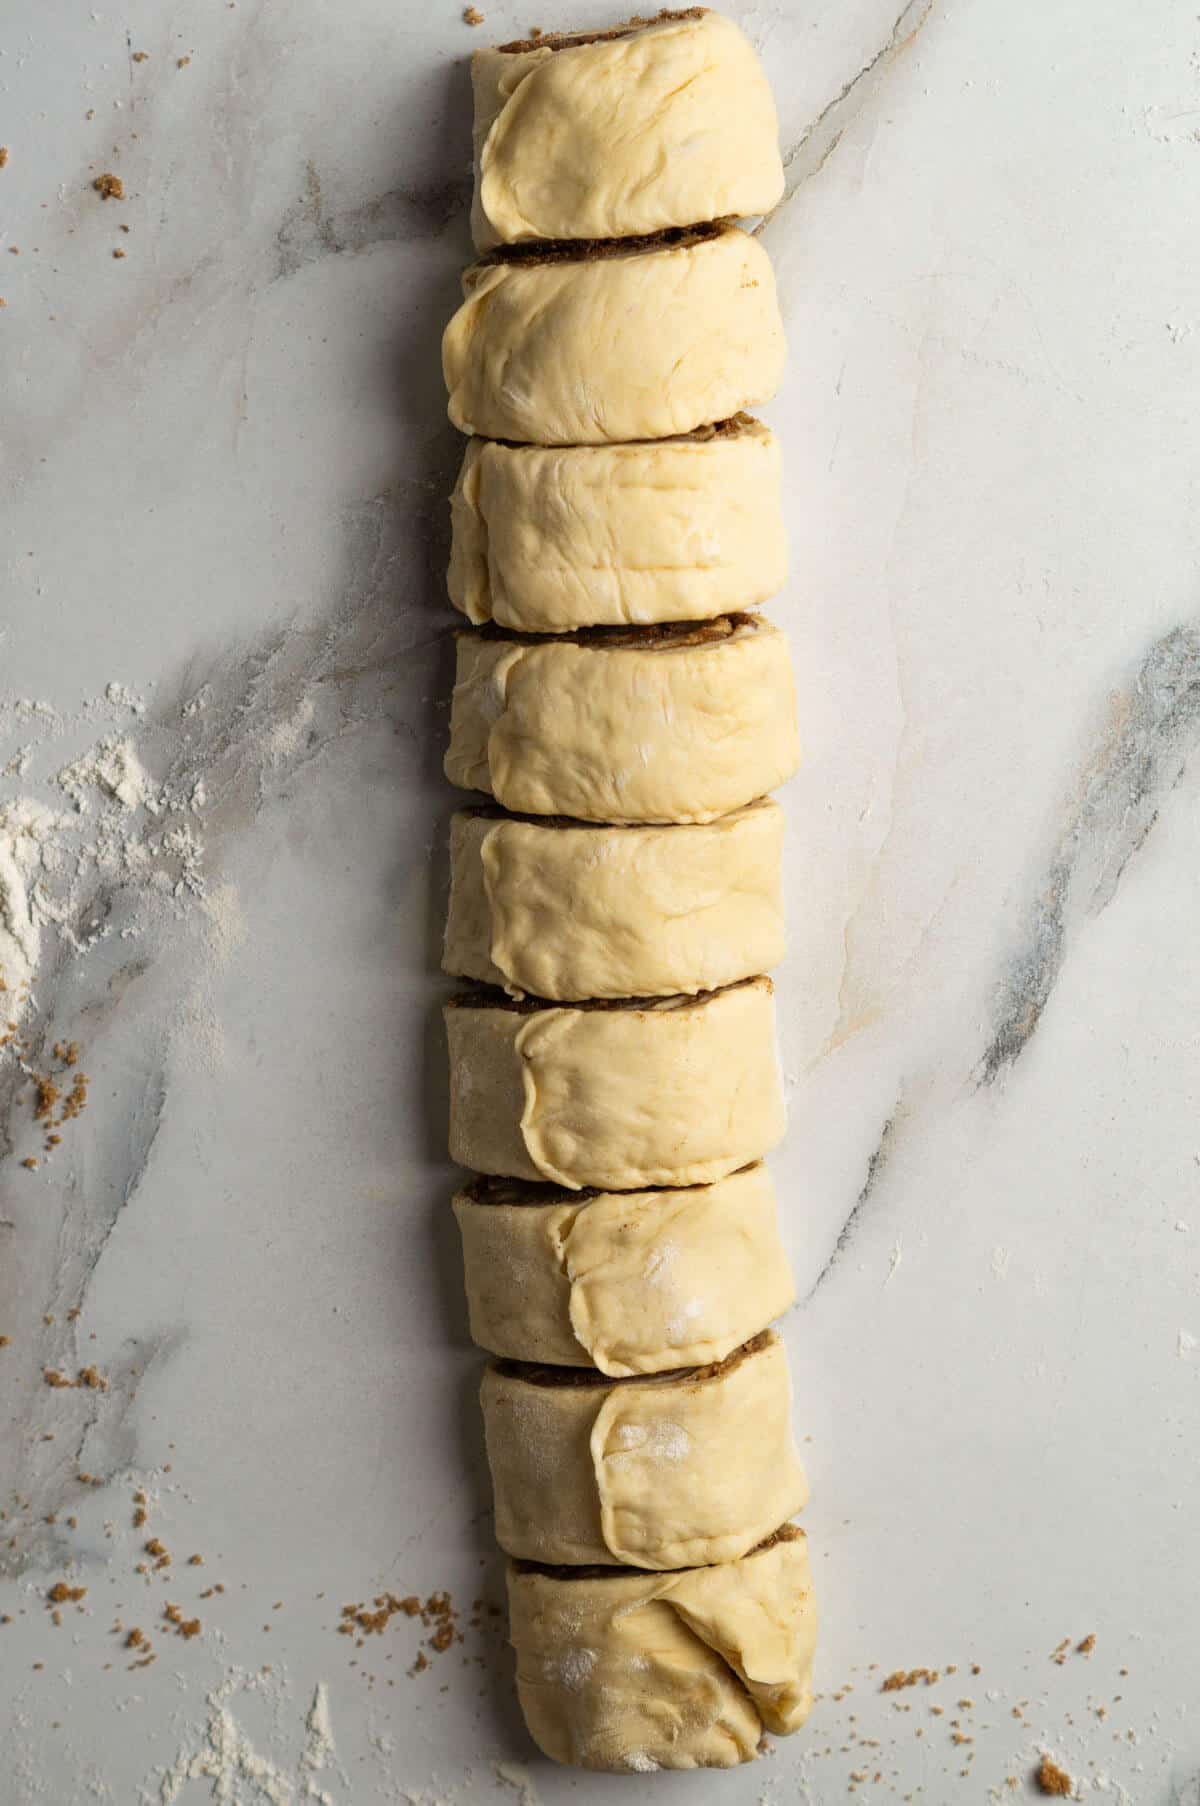 The rolled cinnamon roll dough cut into nine pieces.